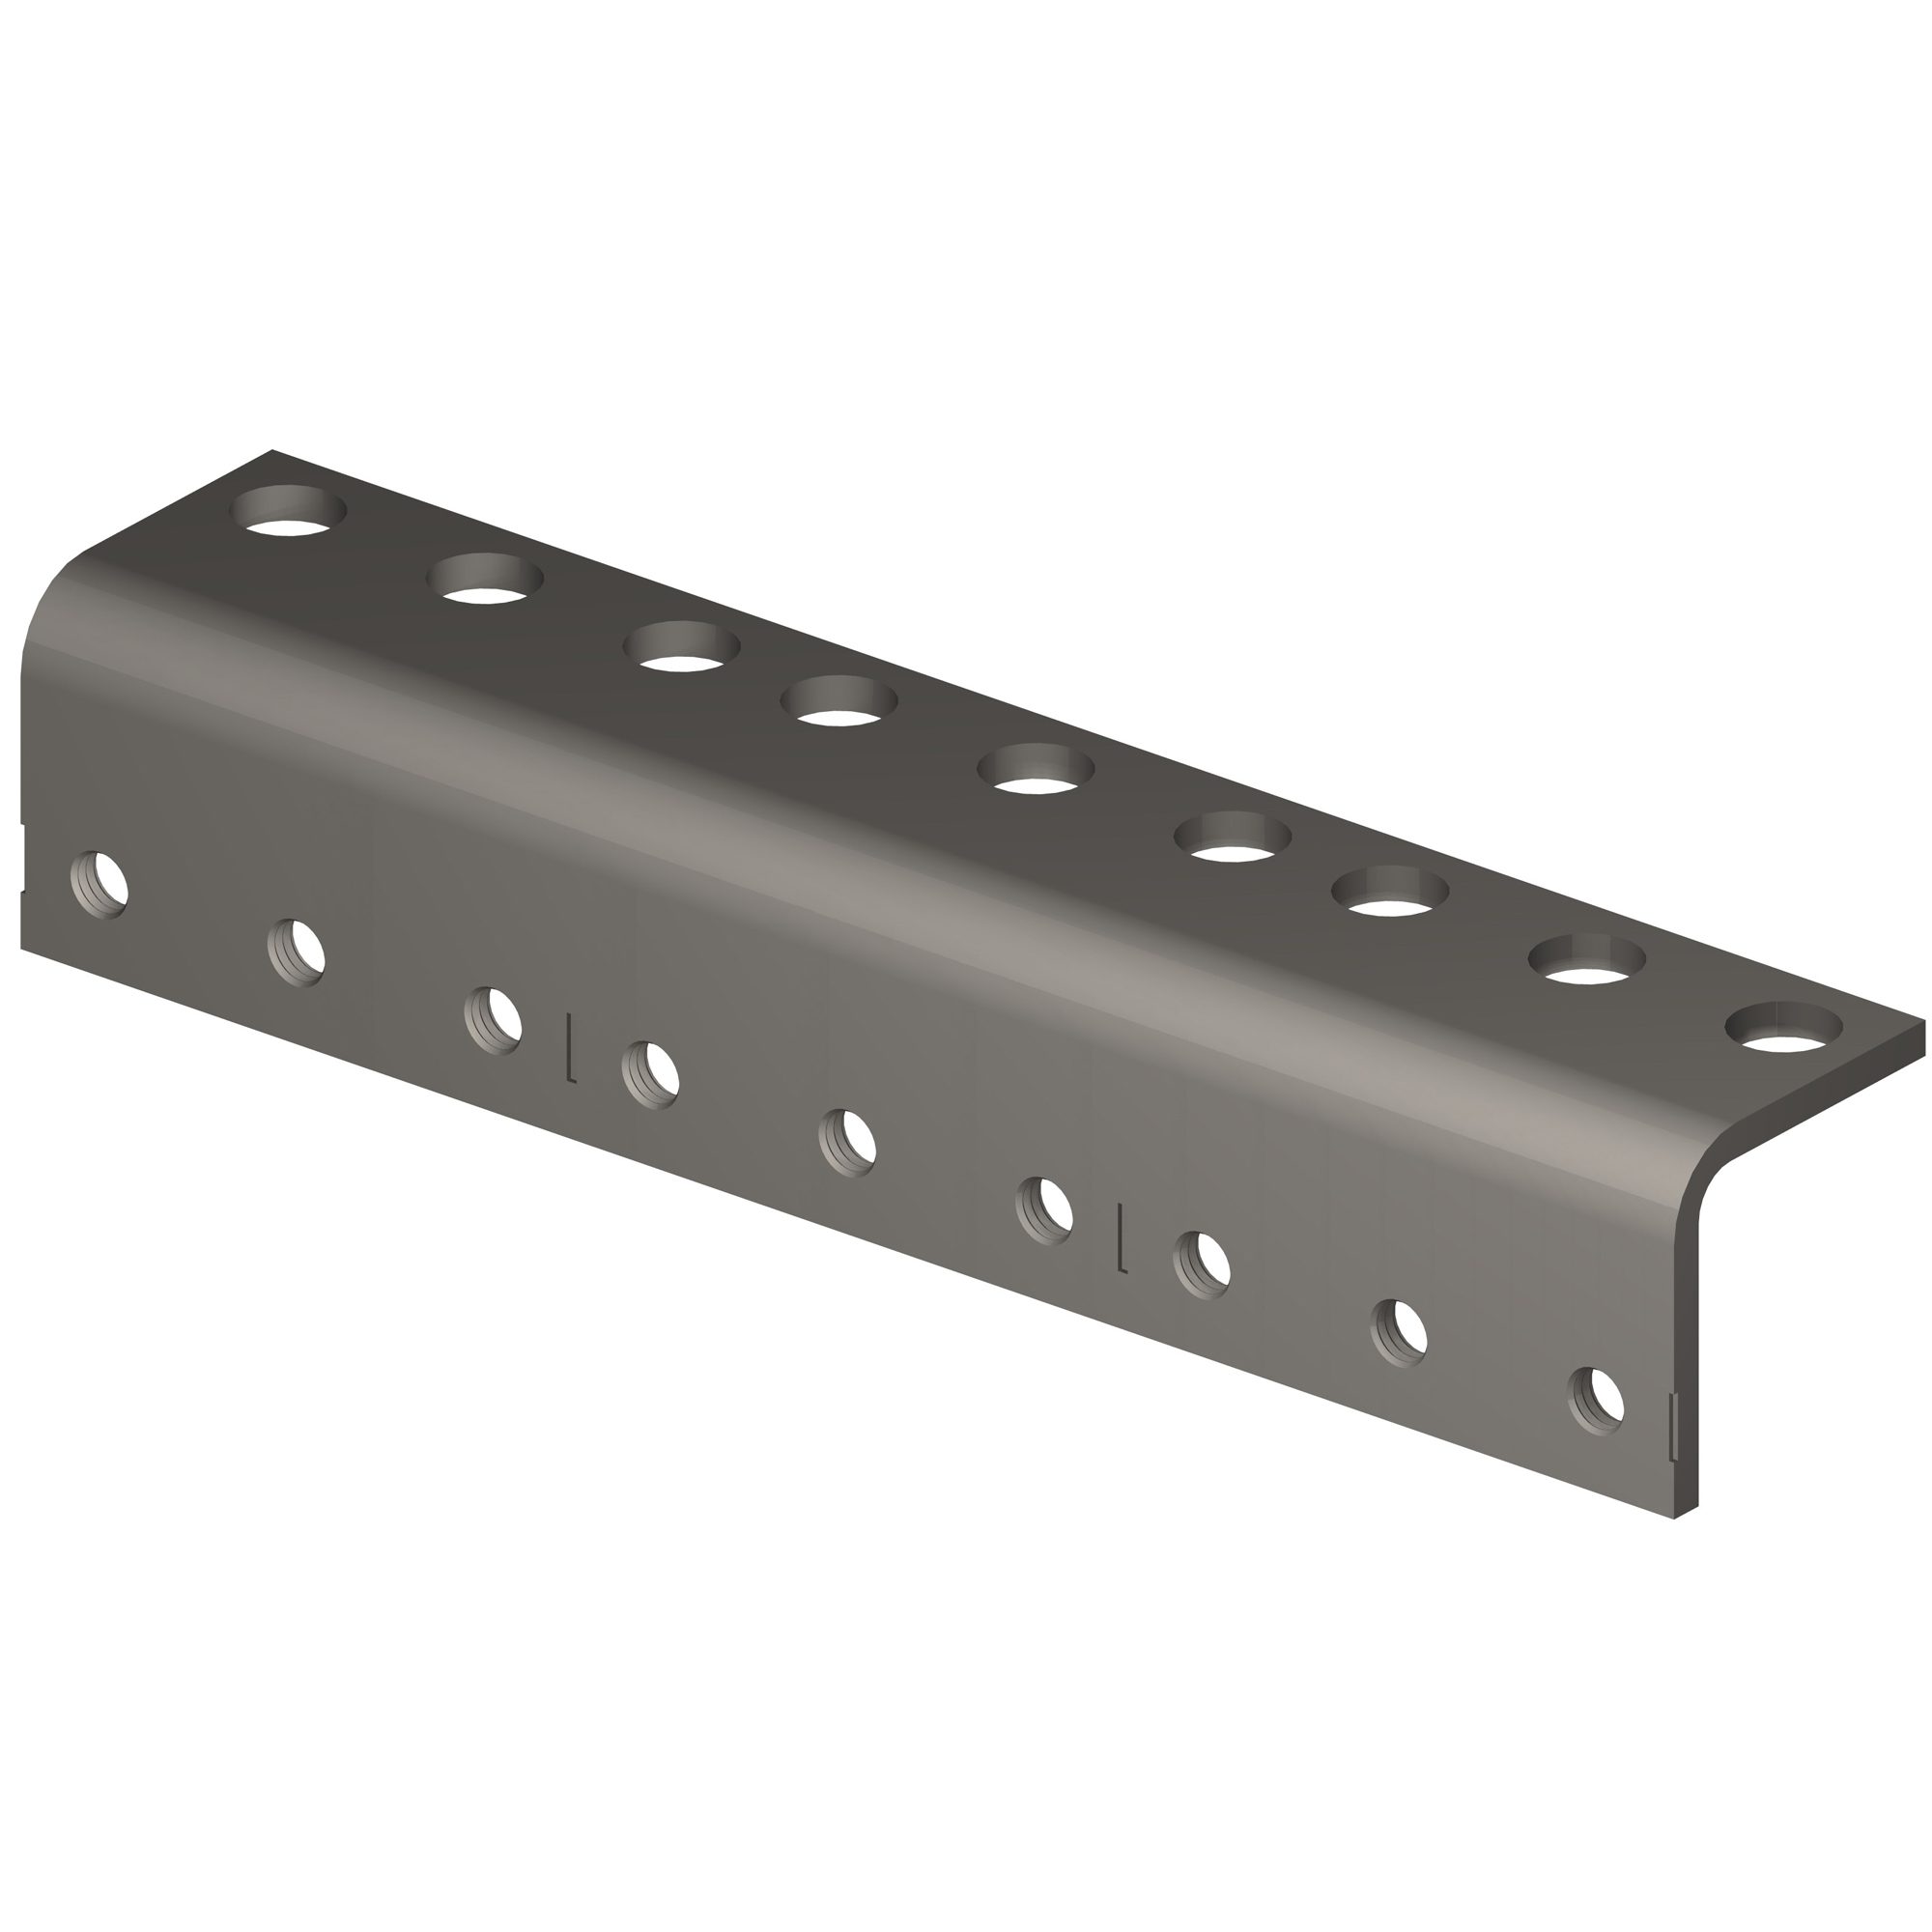 A metal angle with holes in it.